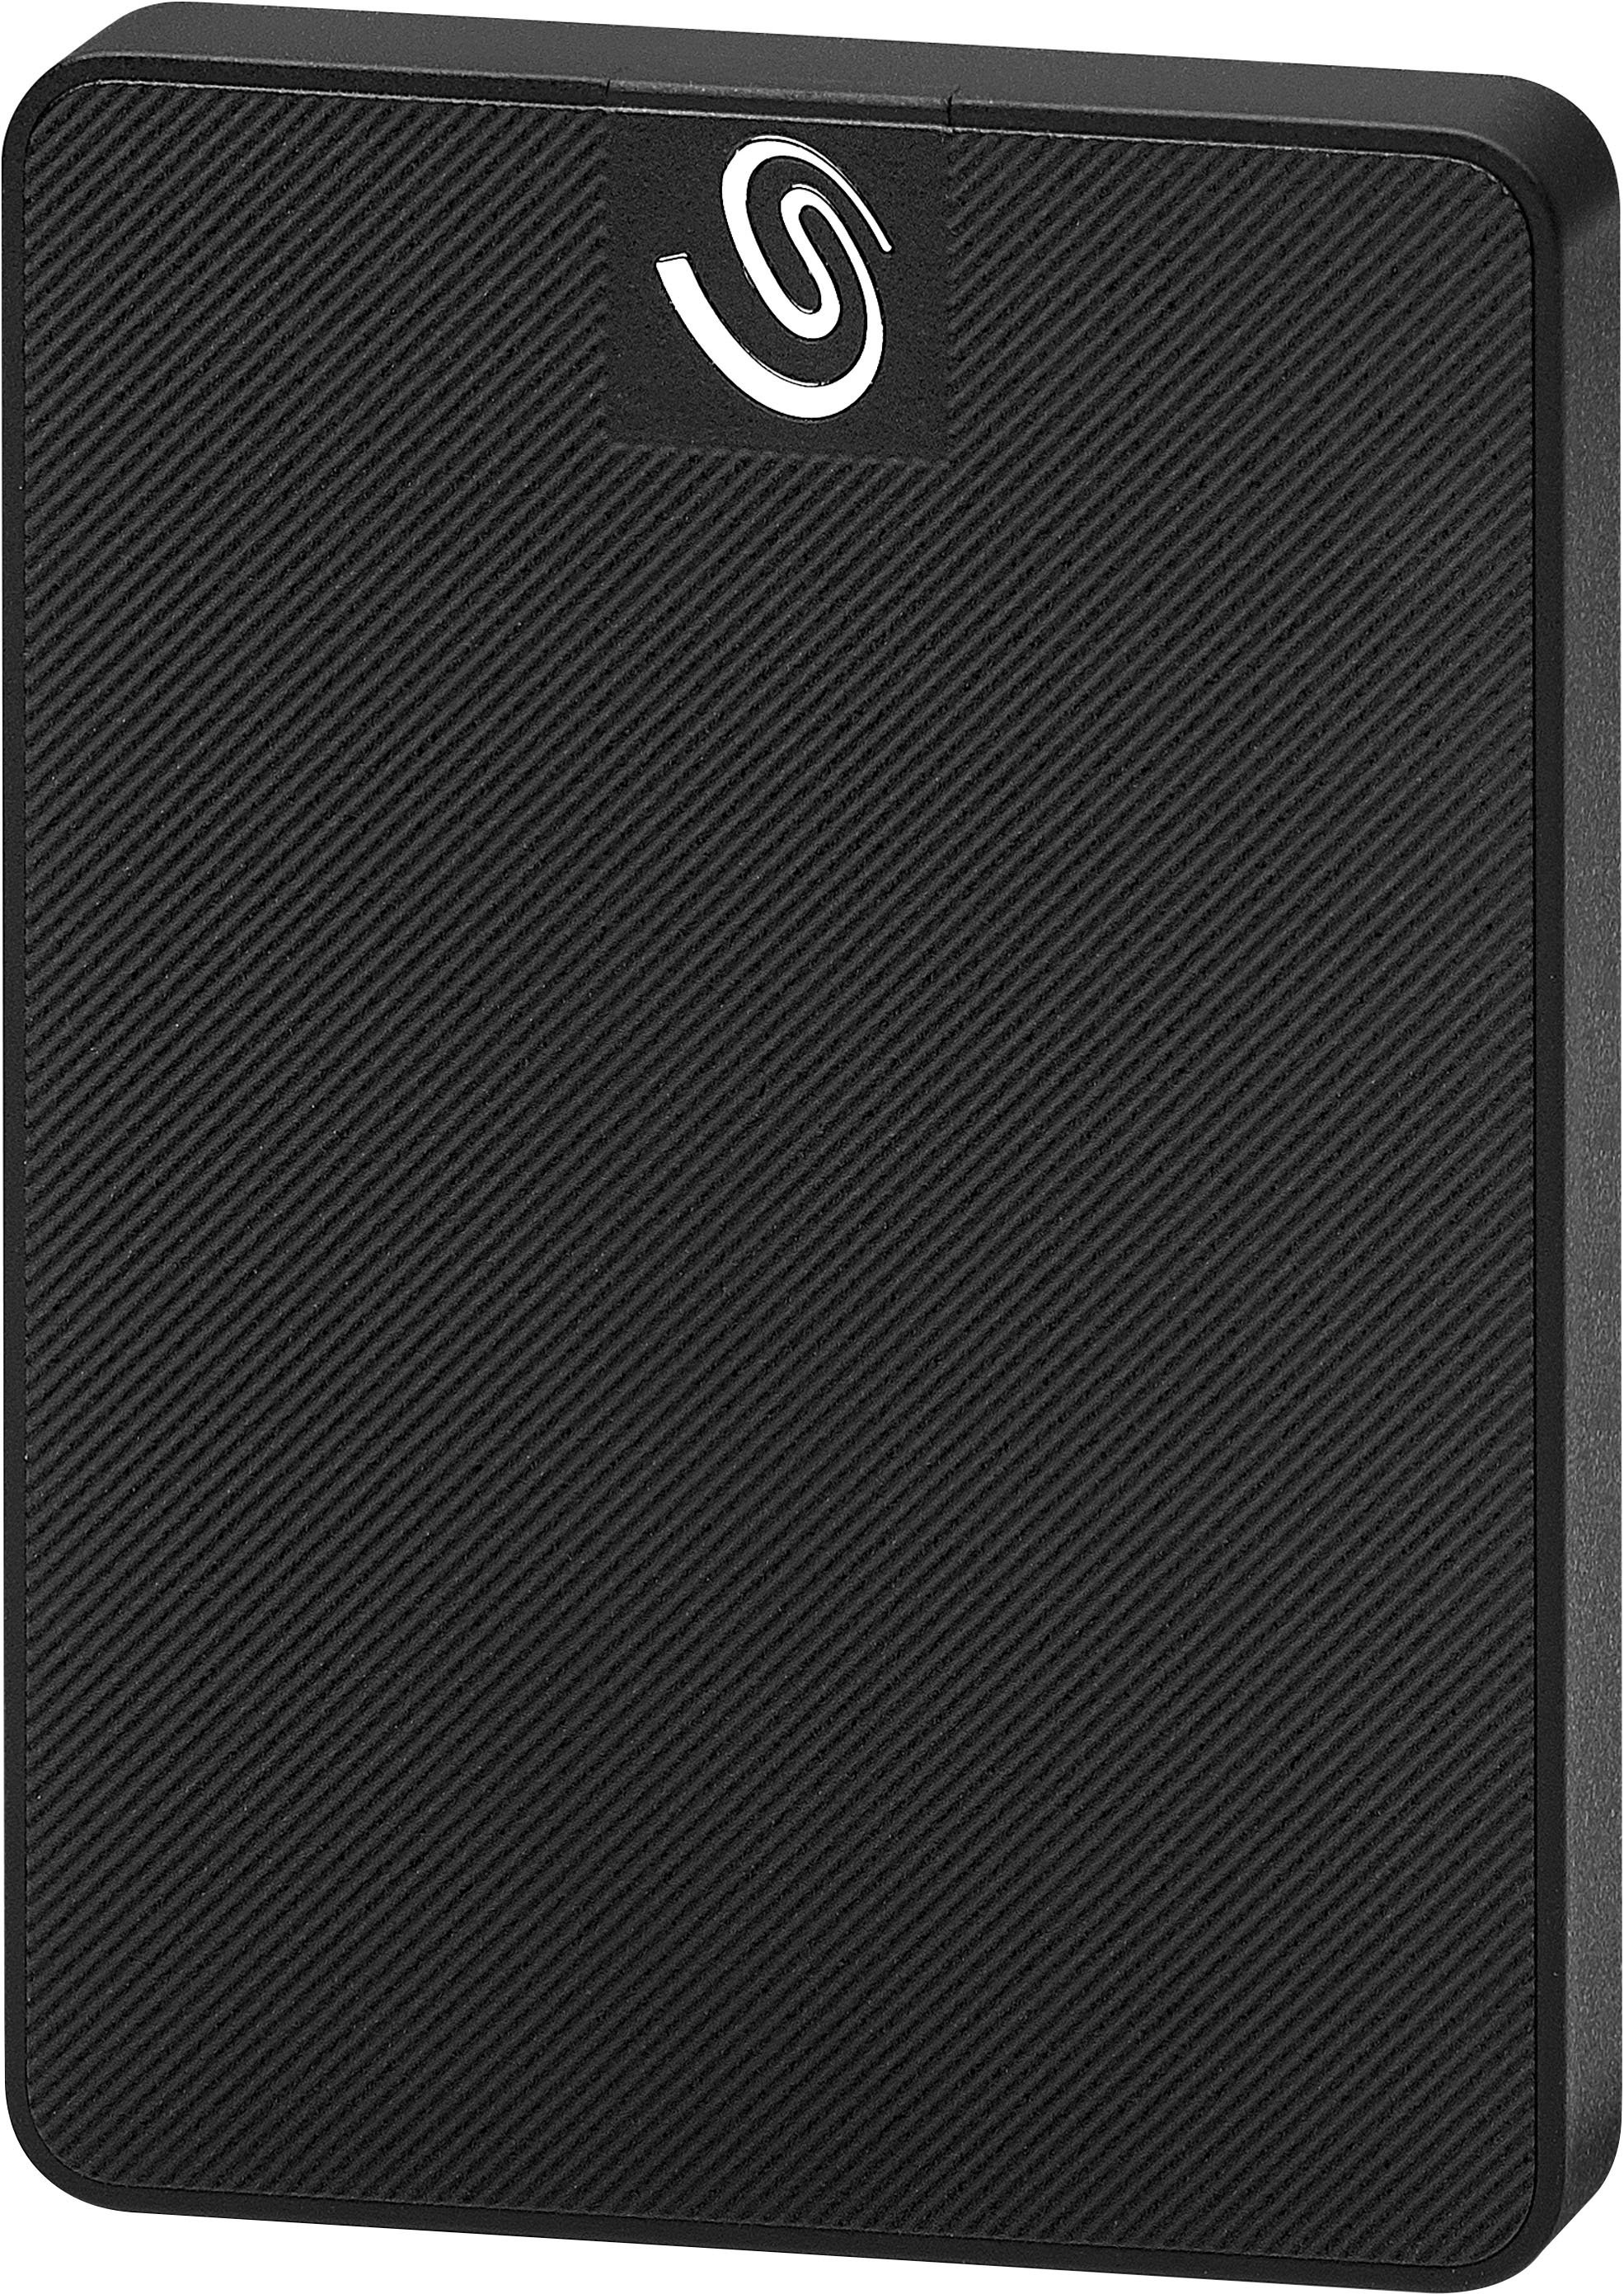 Angle View: Seagate - Expansion 1TB External USB-C and USB 3.0 Portable Solid State Drive with Rescue Data Recovery Services